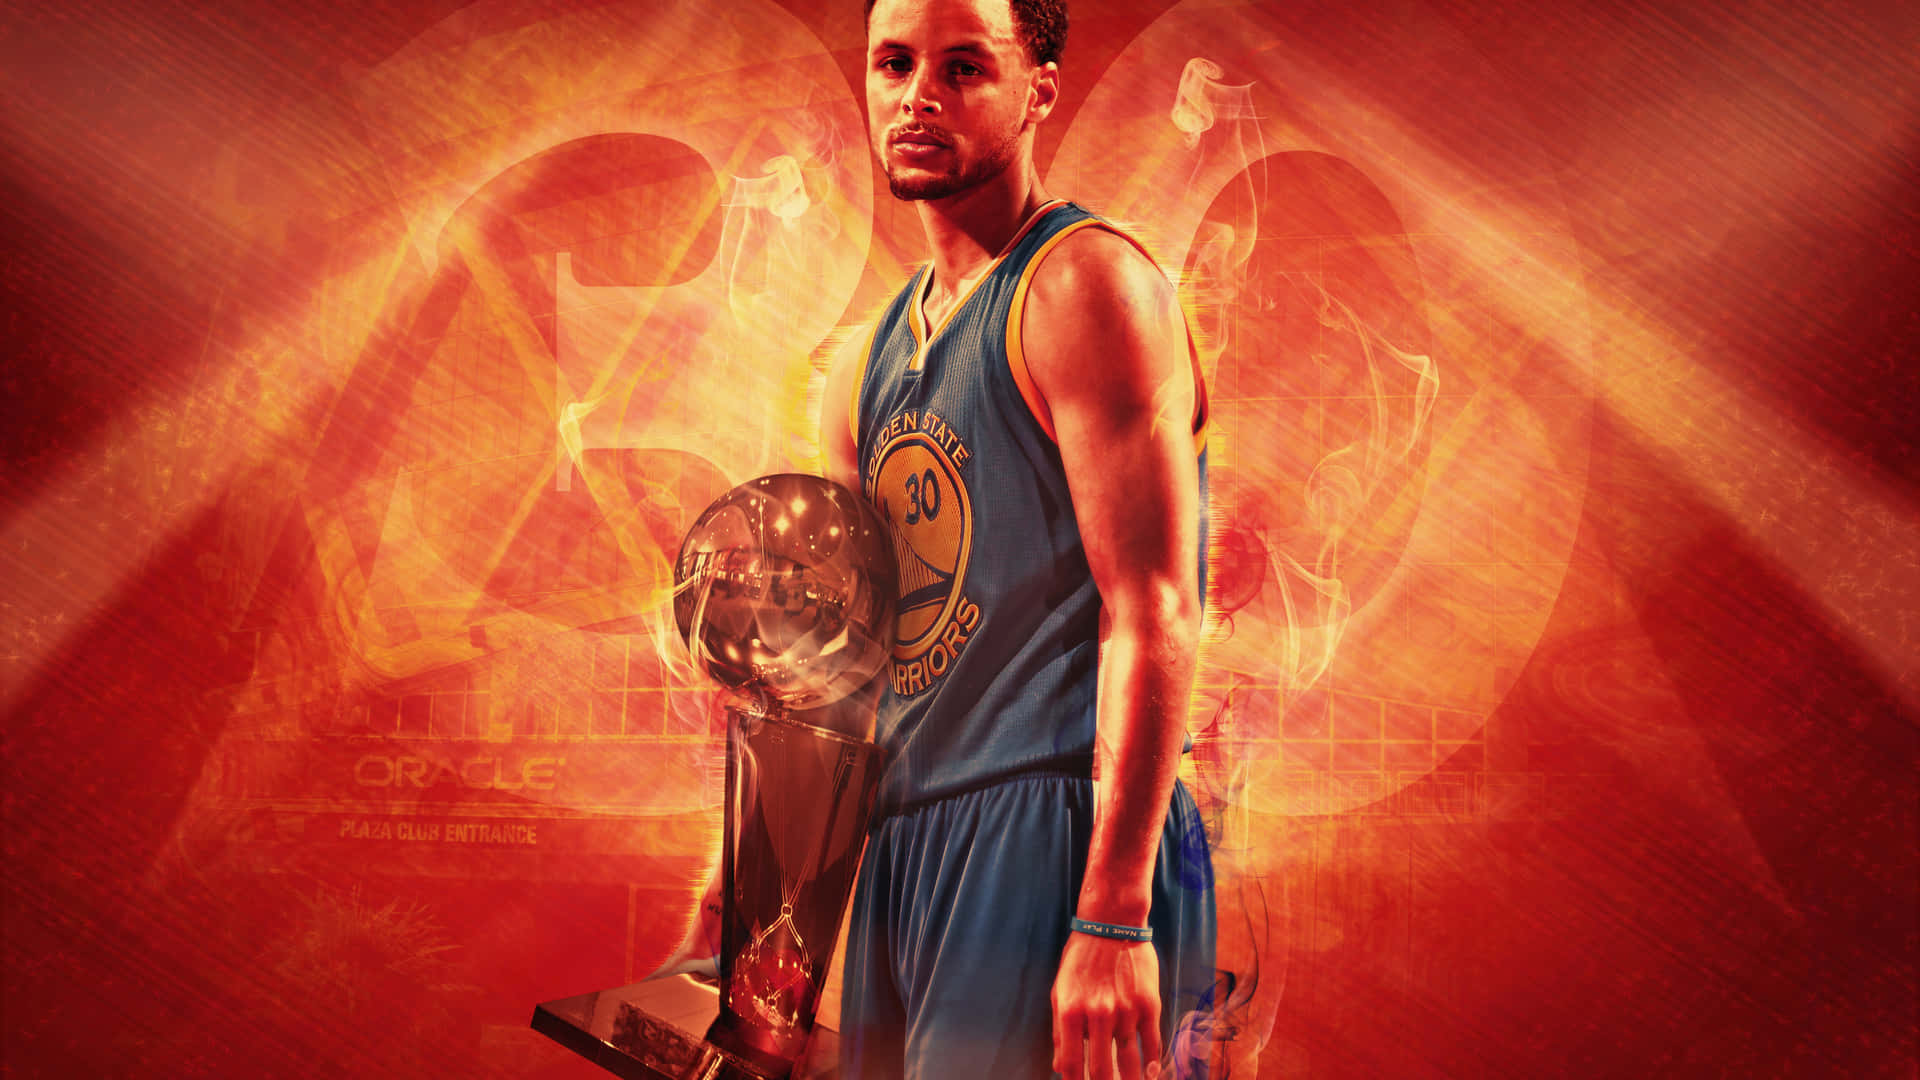 Number 30 Stephen Curry 4k Wallpaper